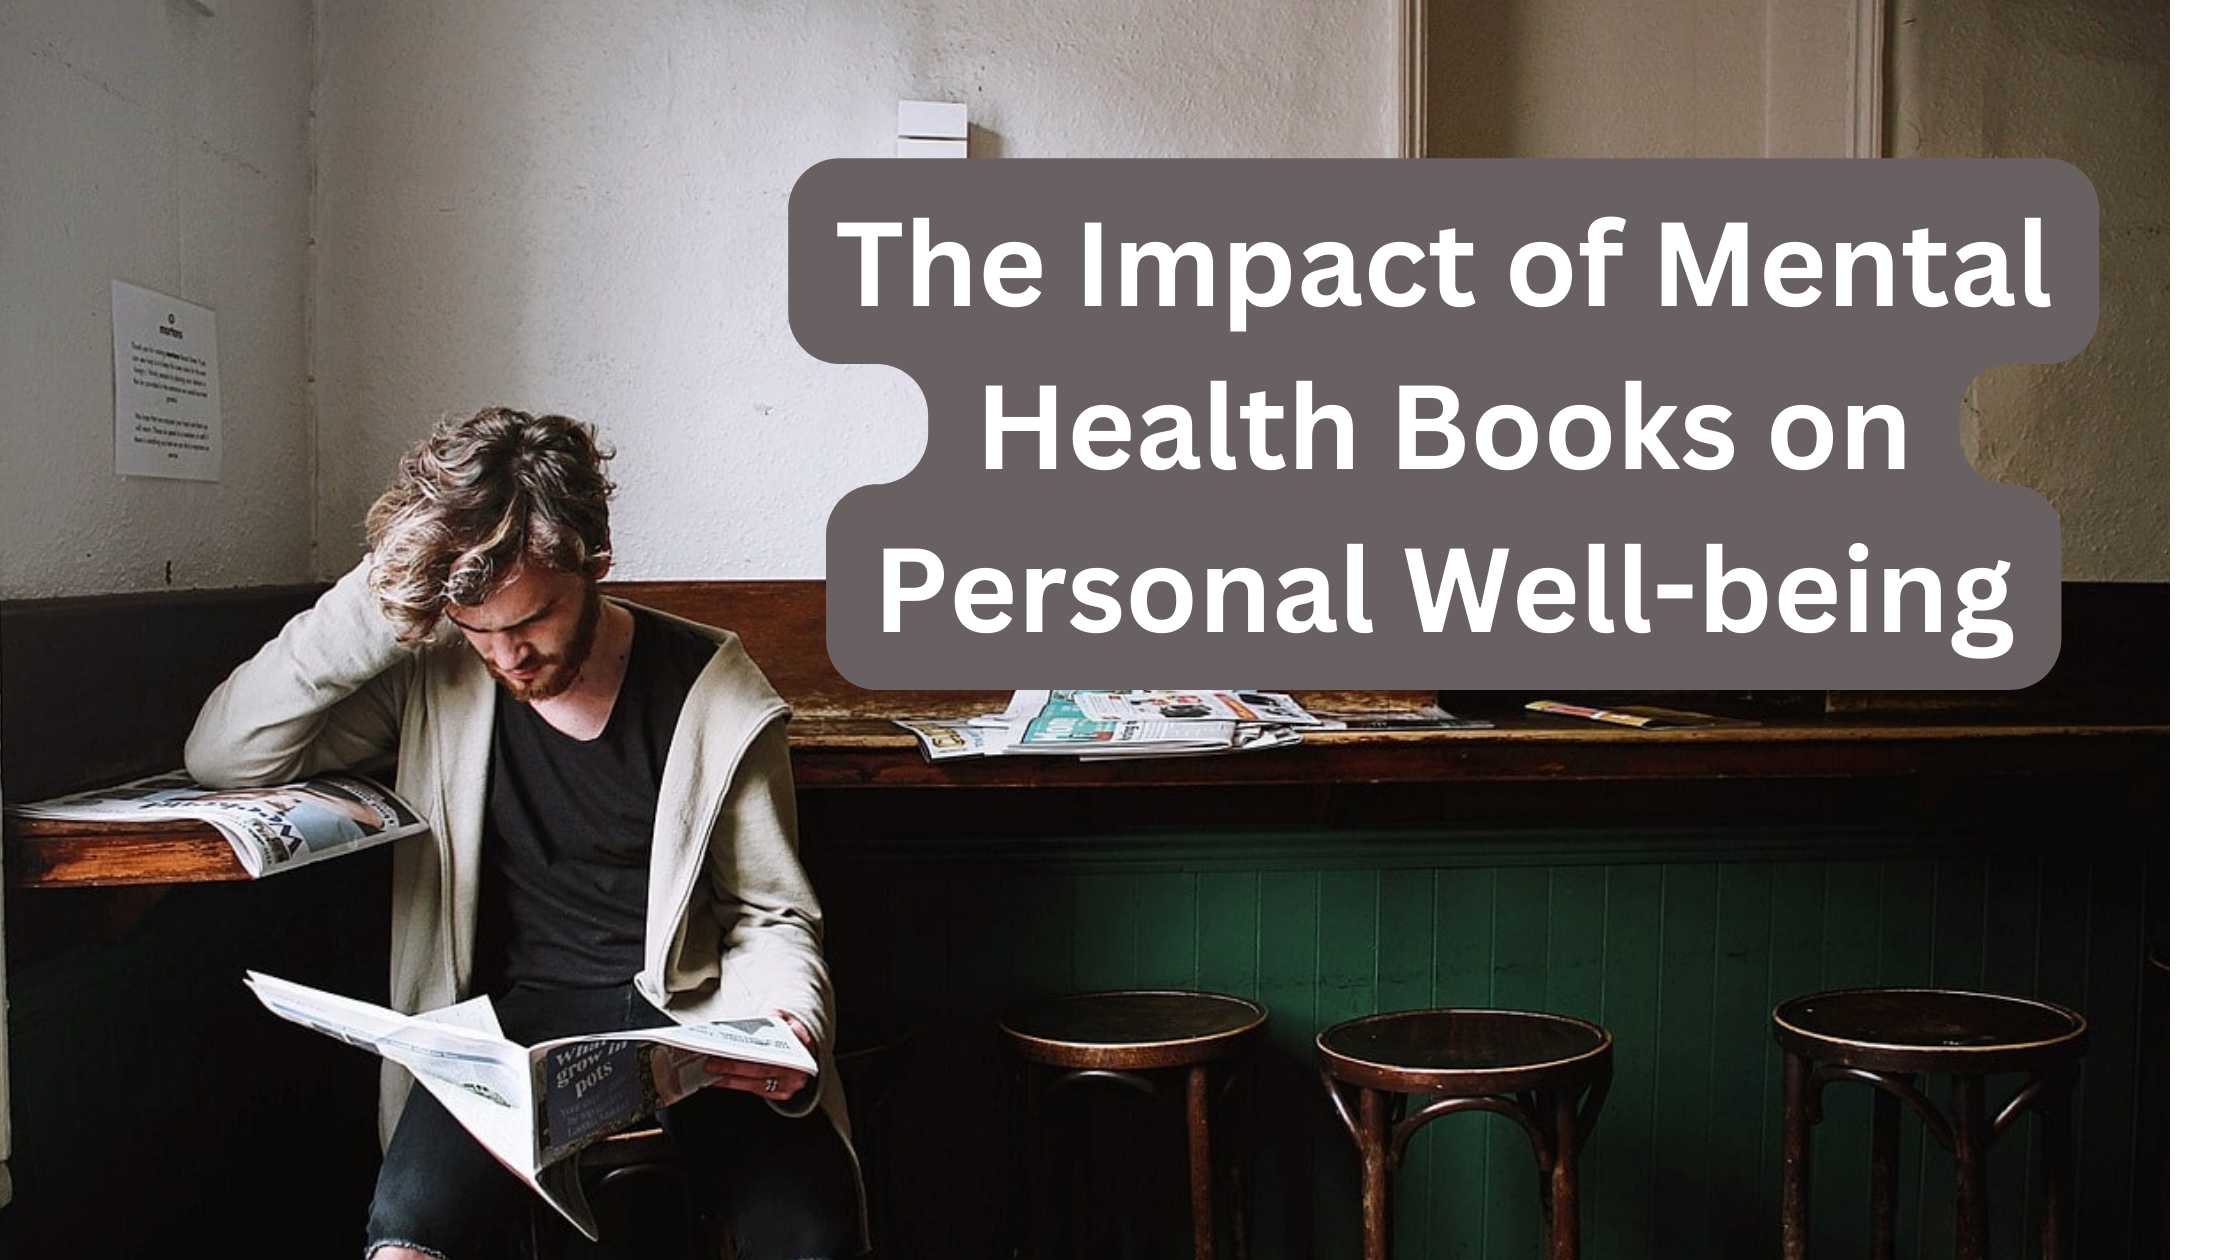 The Impact of Mental Health Books on Personal Well-being